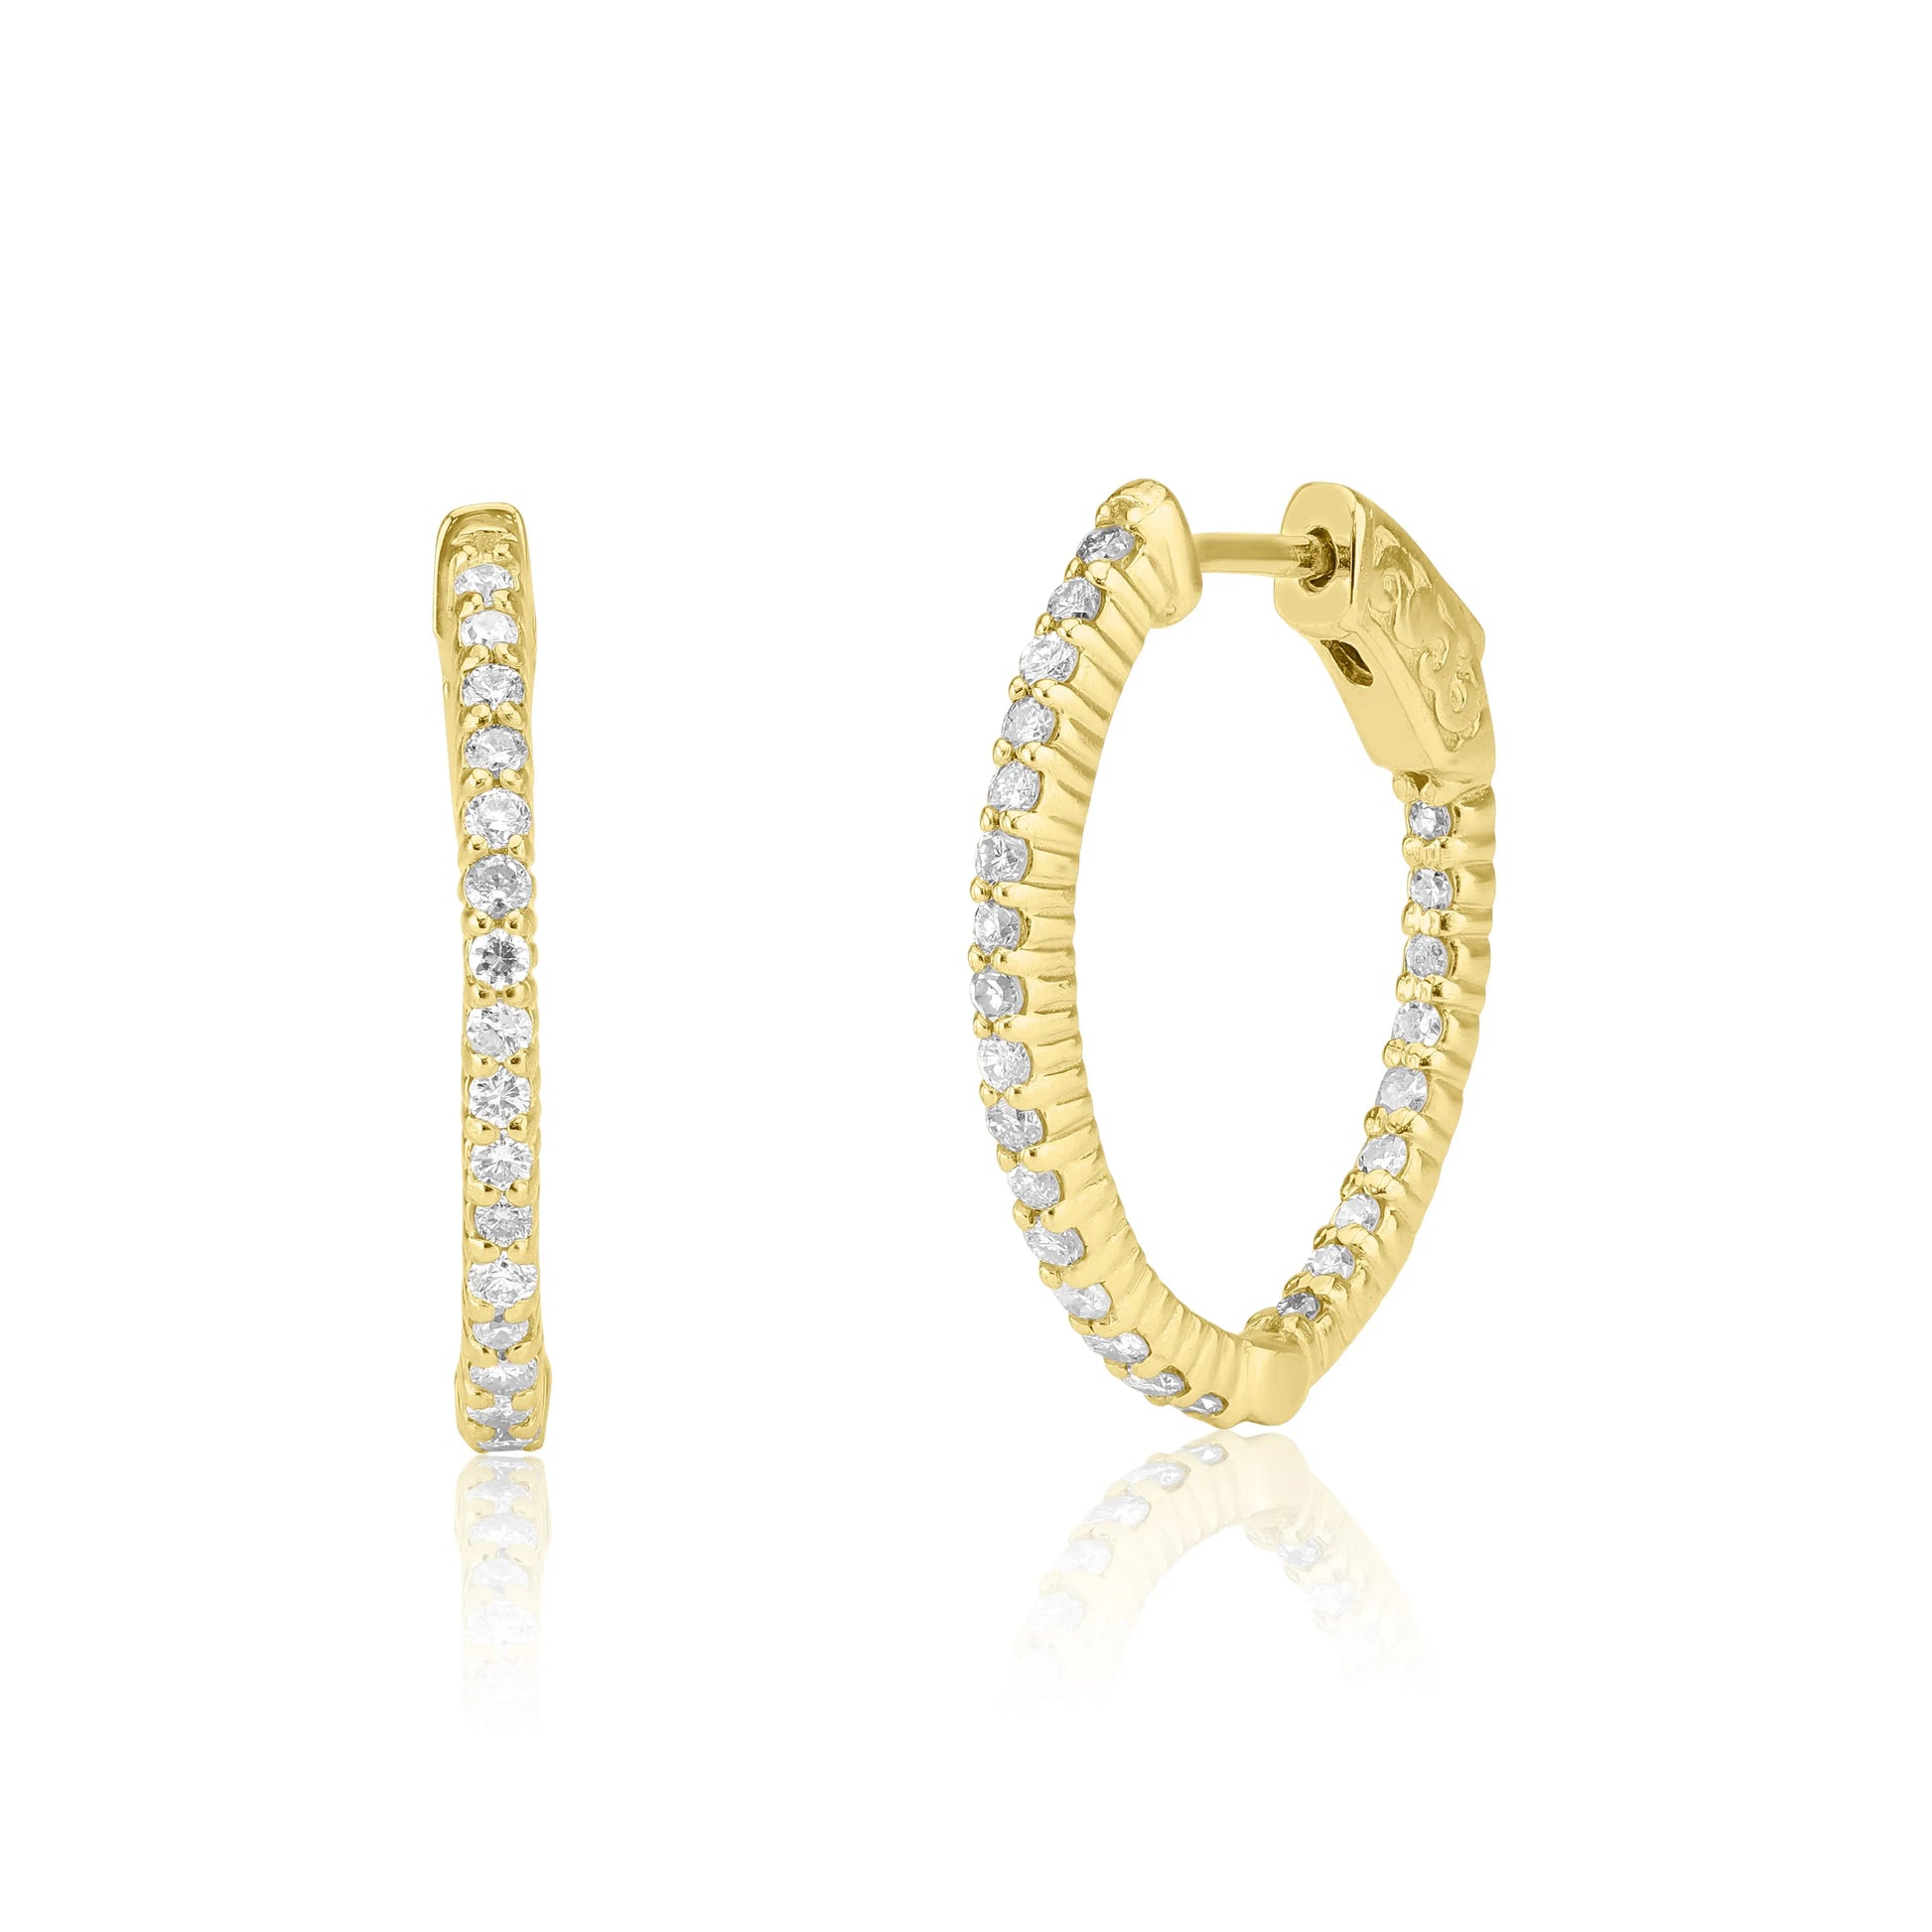 Yellow Gold Earrings Inside Out Diamond Oval Hoop Earrings Danson Jewelers Danson Jewelers 